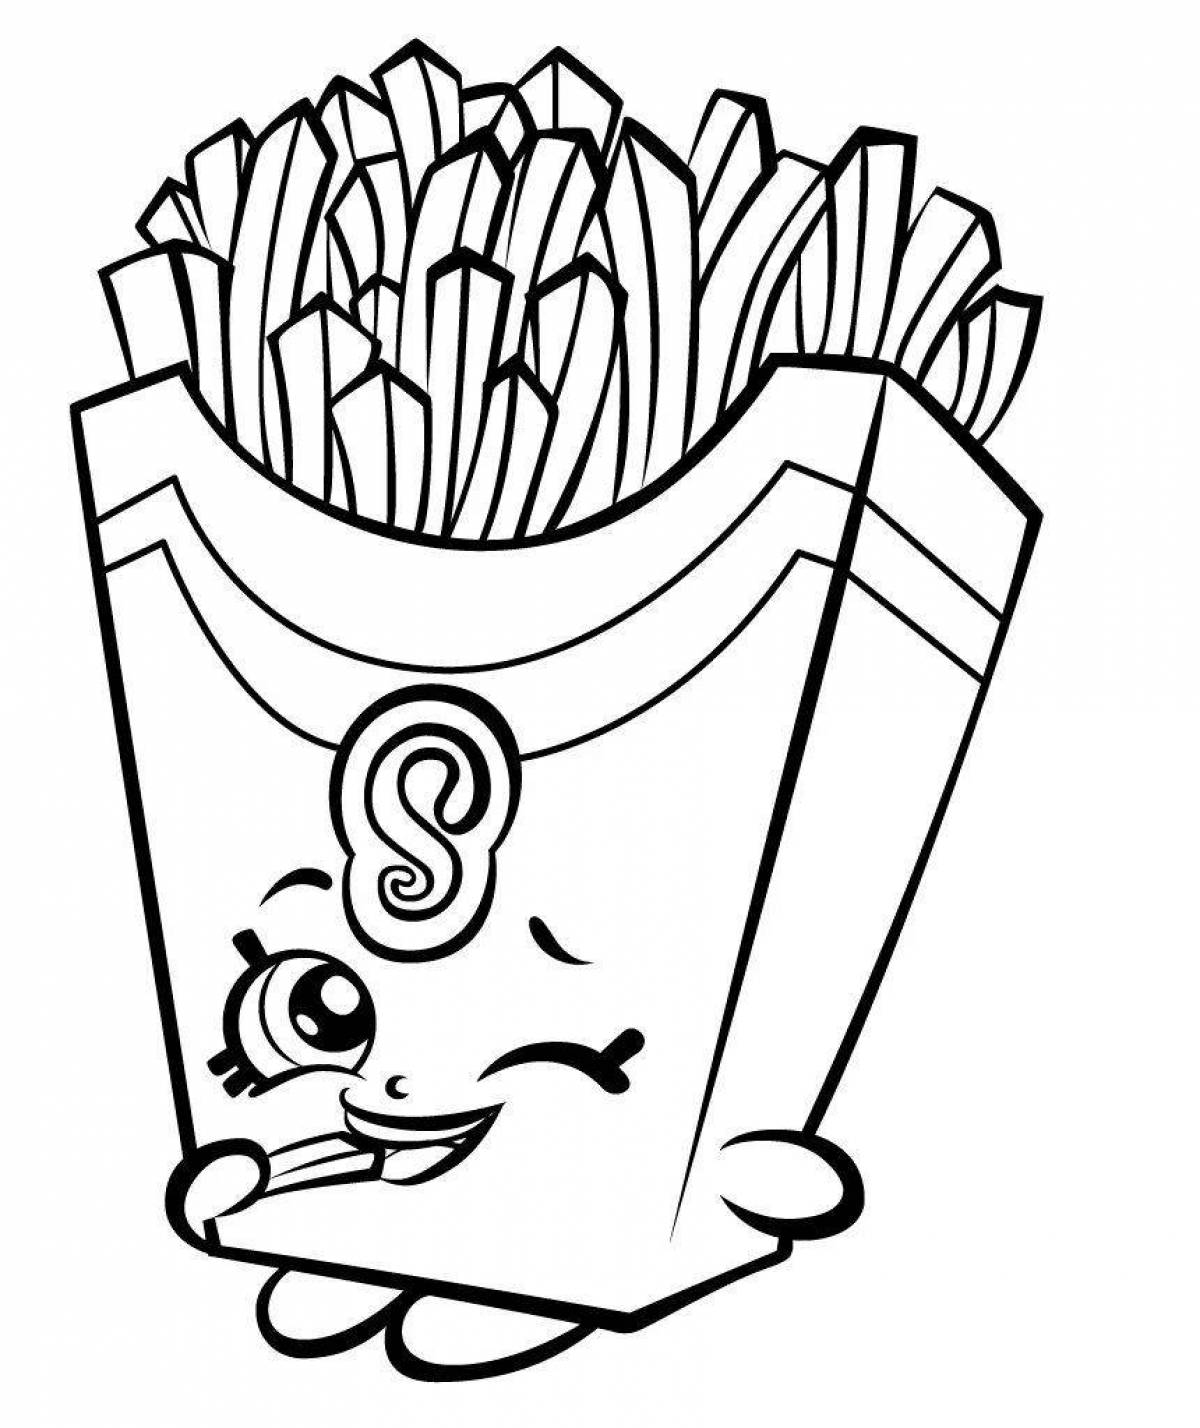 Sweet and sour french fries coloring page